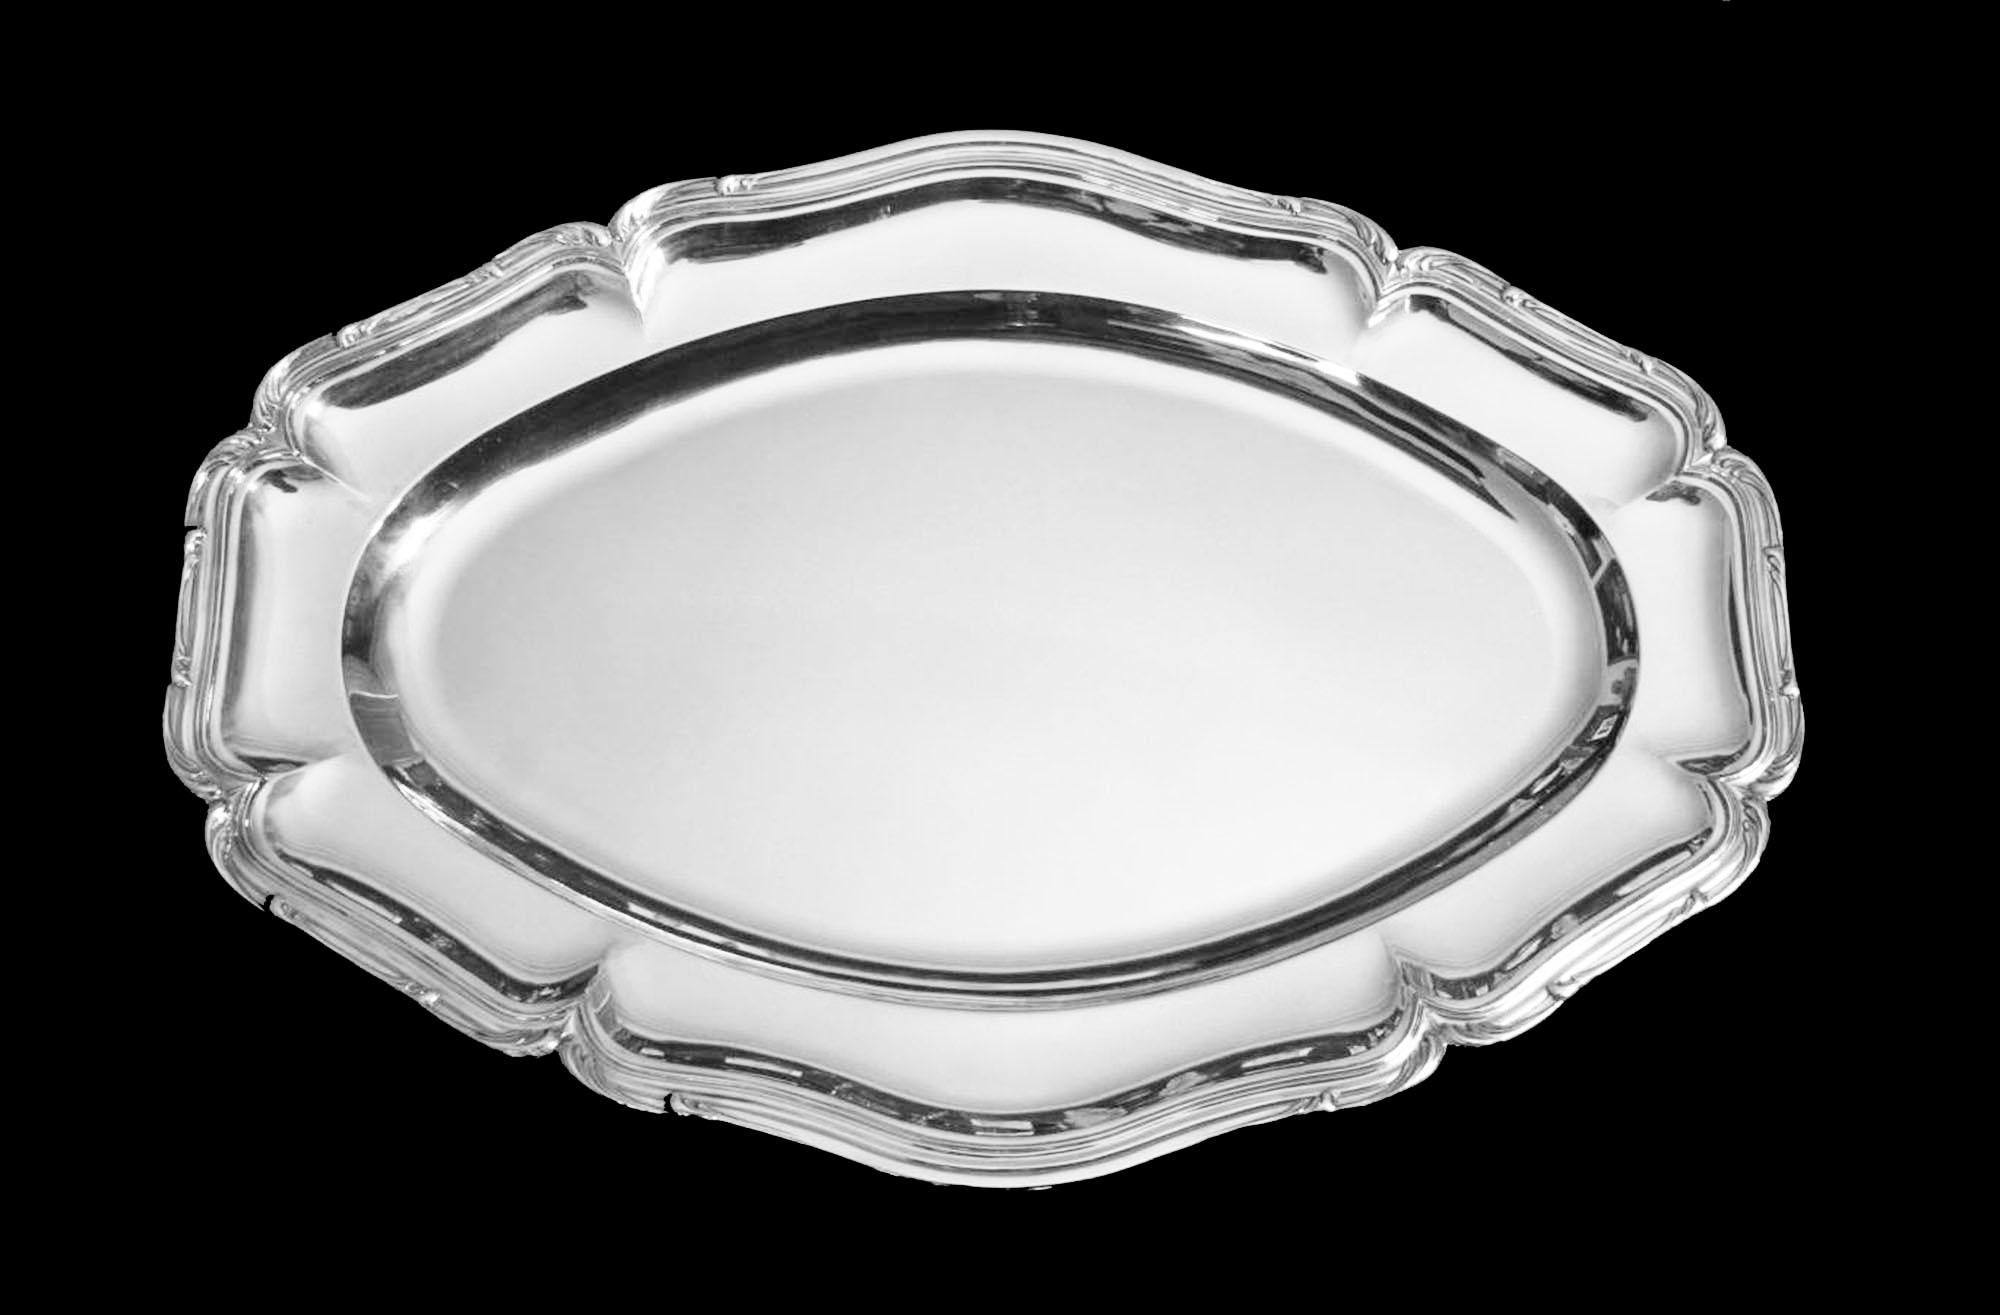 Direct from a private mansion in Paris, a spectacular 10pc. set (4 oval platters & 6 round platters) of 19th century, 950 sterling silver, Louis XVI serving platters by the one of Frances premier silversmiths 